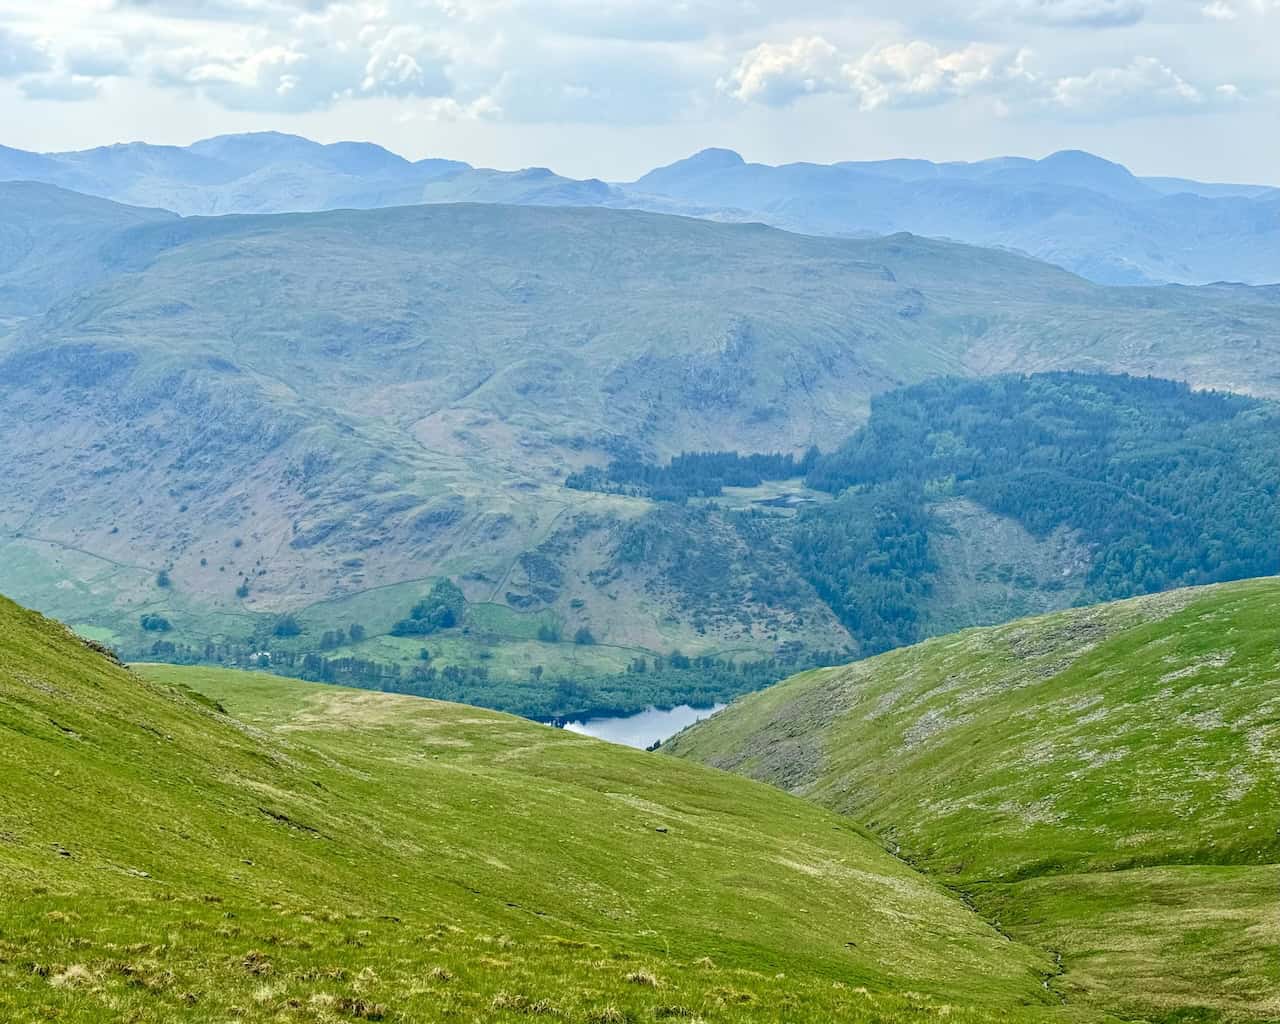 The view west from above Swallow Scarth between Helvellyn and Nethermost Pike reveals Thirlmere Reservoir, with Harrop Tarn and Ullscarf in the distance.